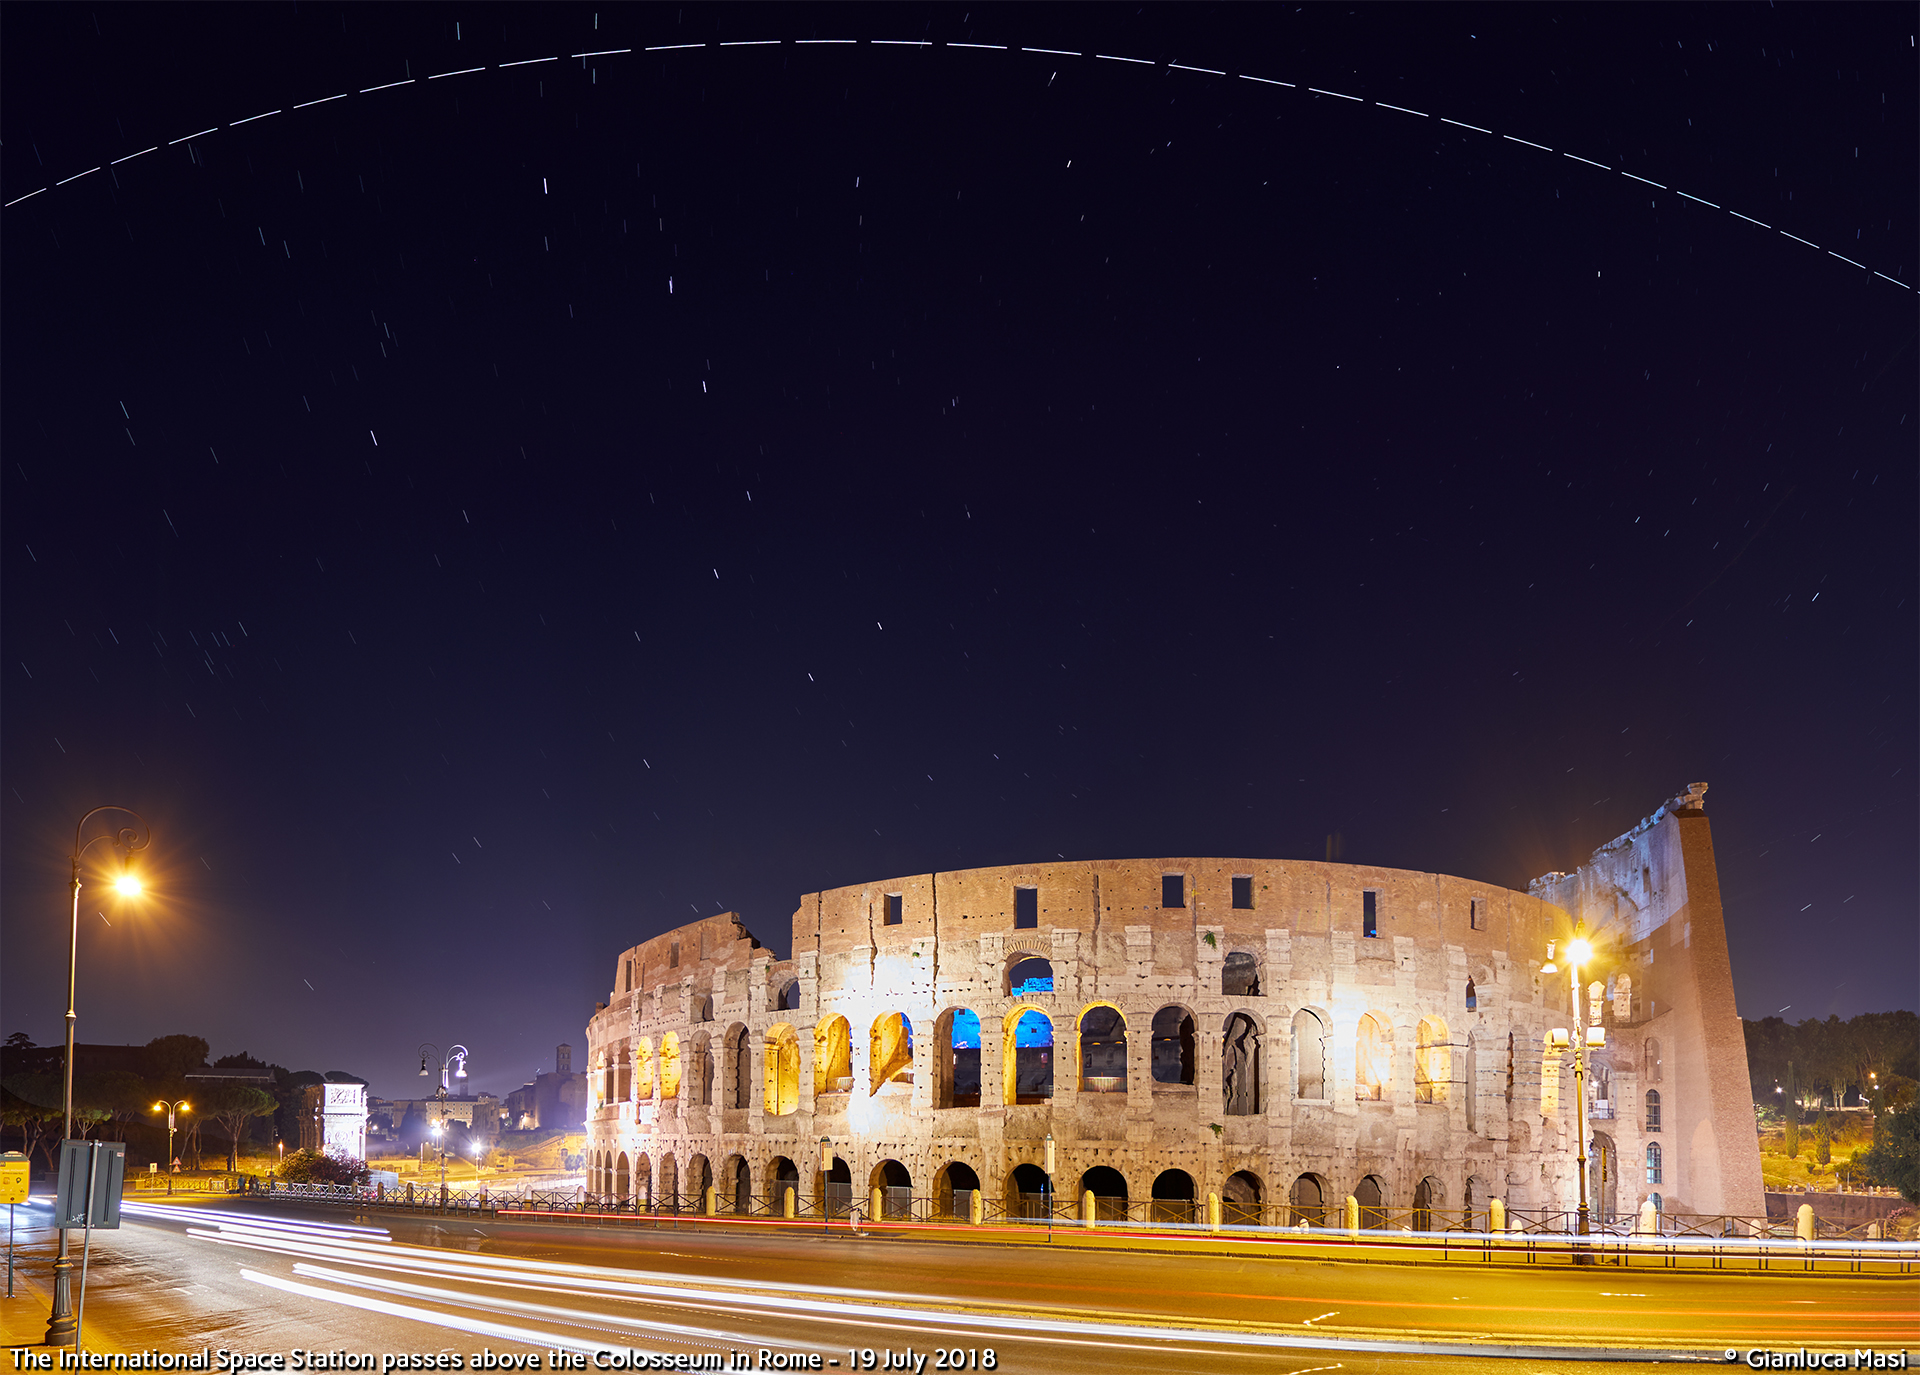 The International Space Station crosses the sky above Rome, embracing the Colosseum - 19 July 2018